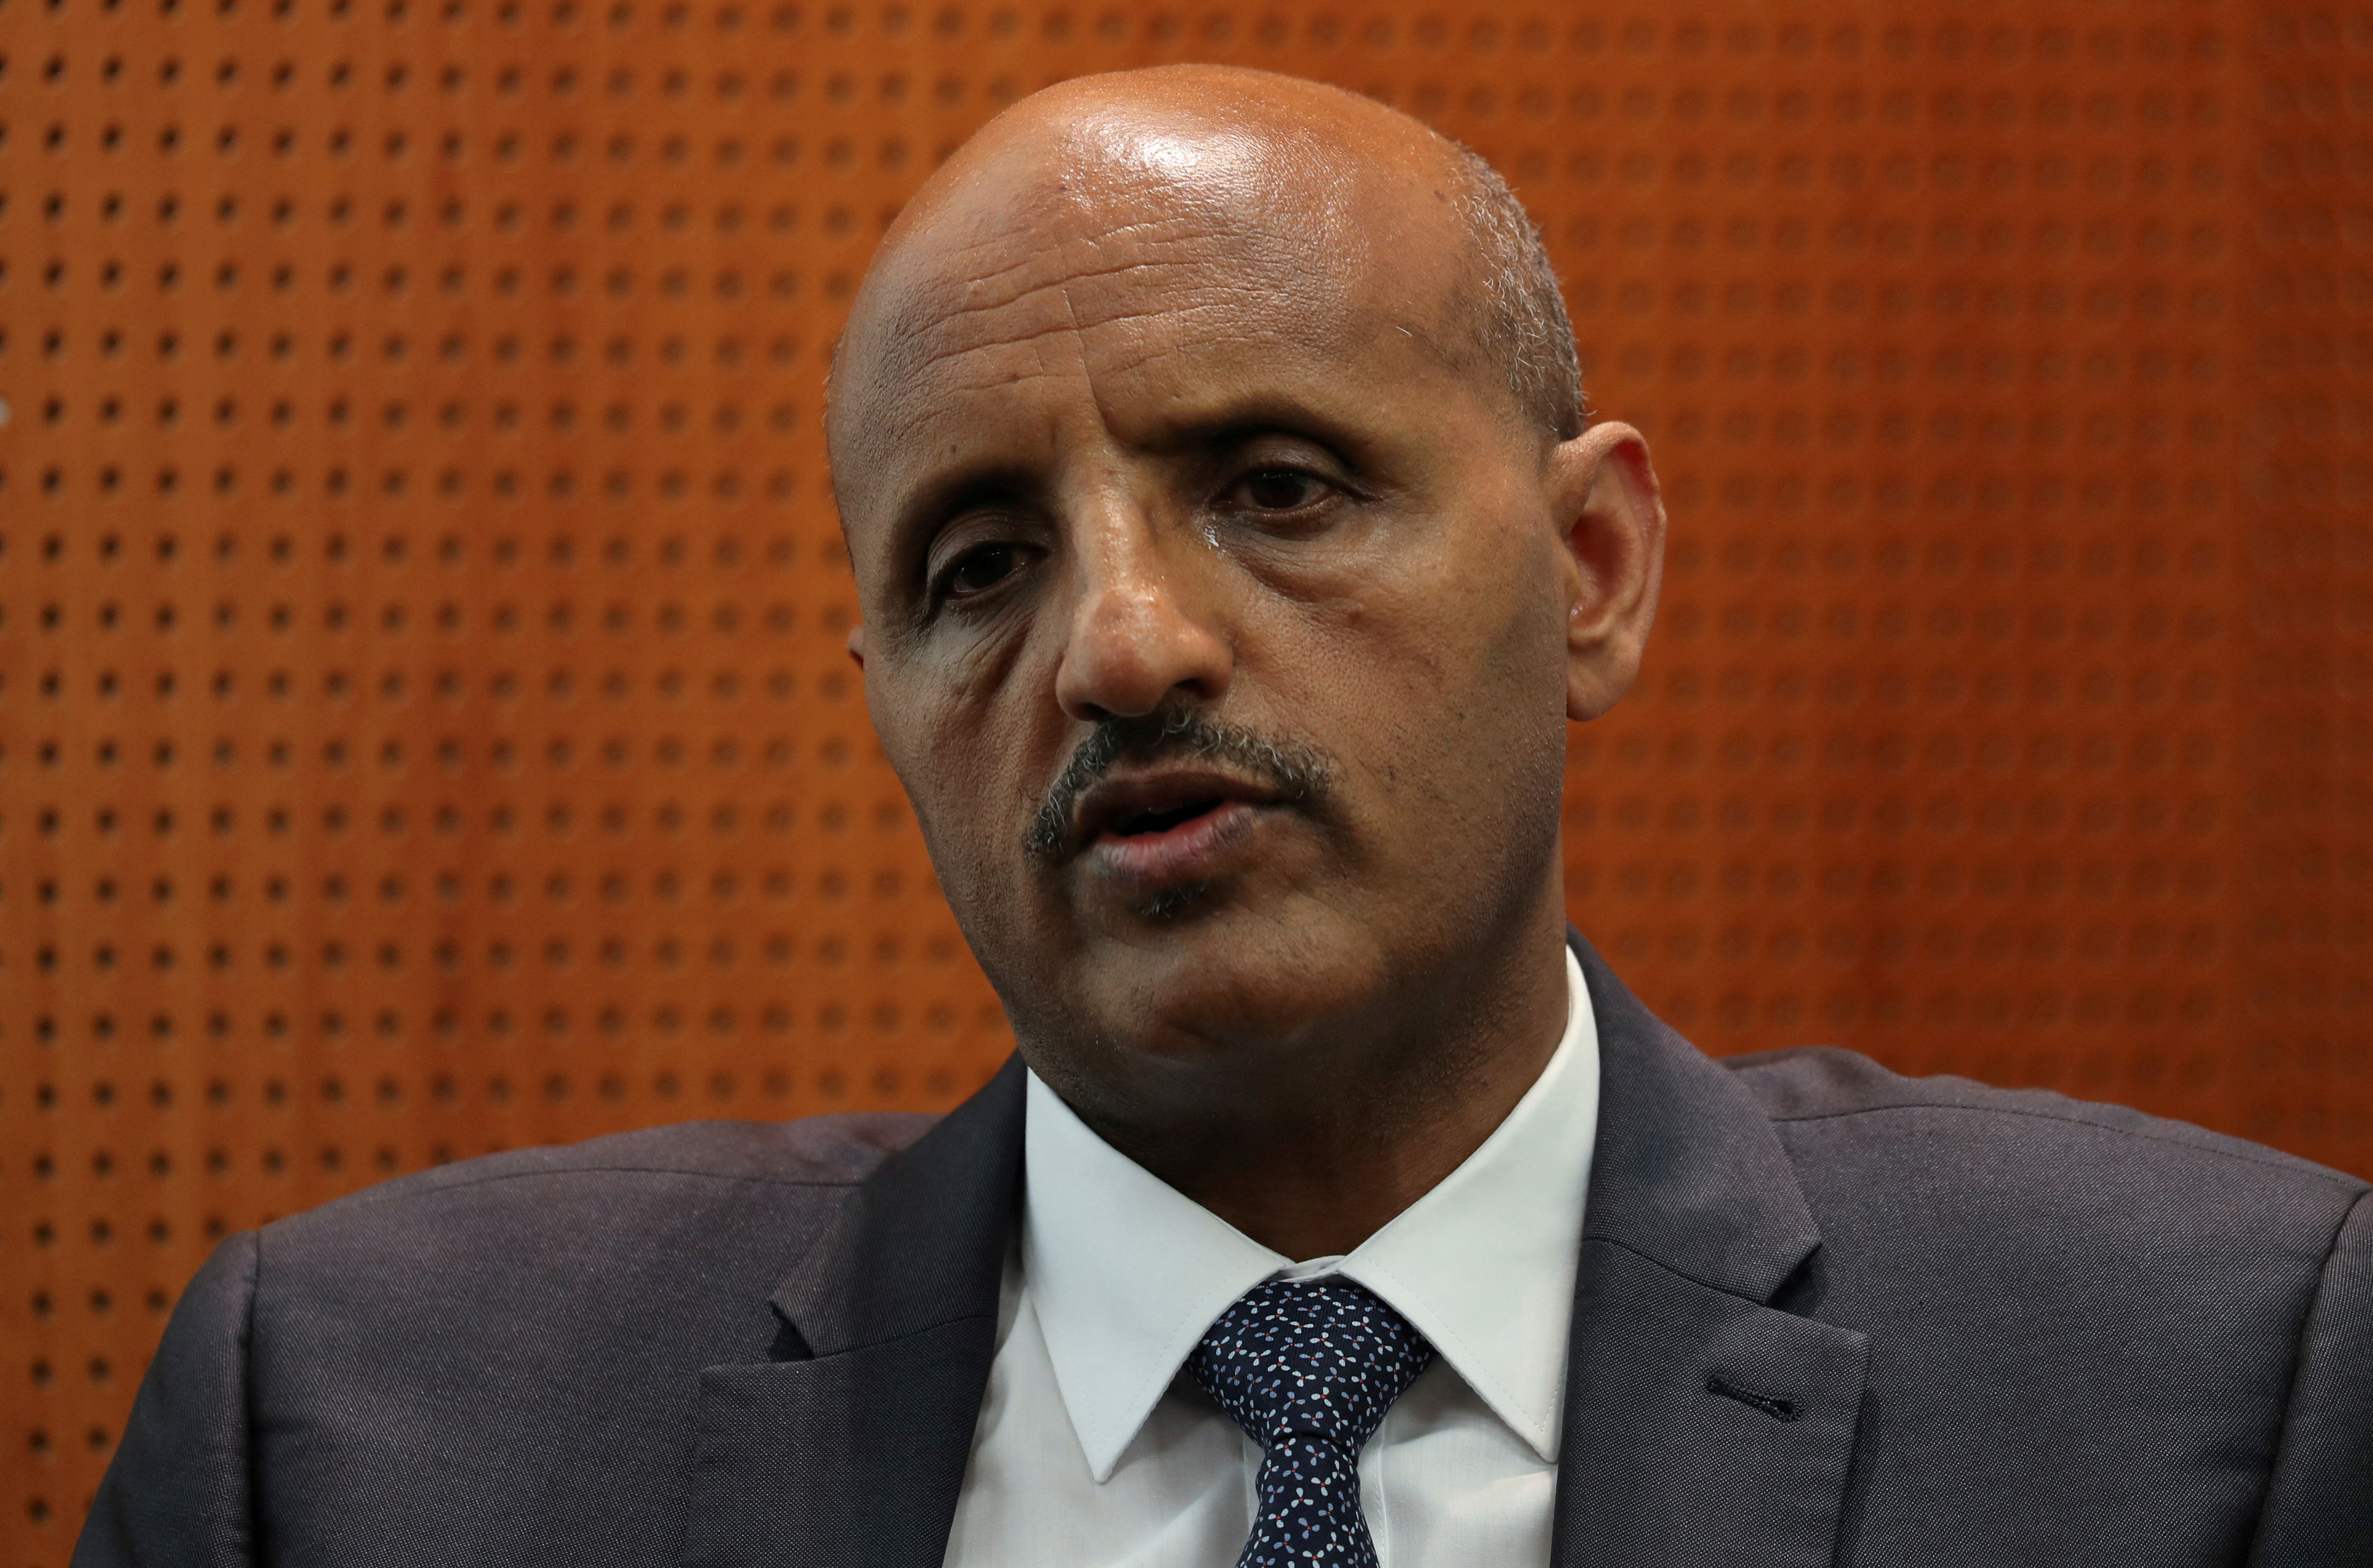 Ethiopian Airlines CEO Tewolde Gebremariam speaks during a Reuters interview amid concerns about the spread of coronavirus disease (COVID-19), in Addis Ababa